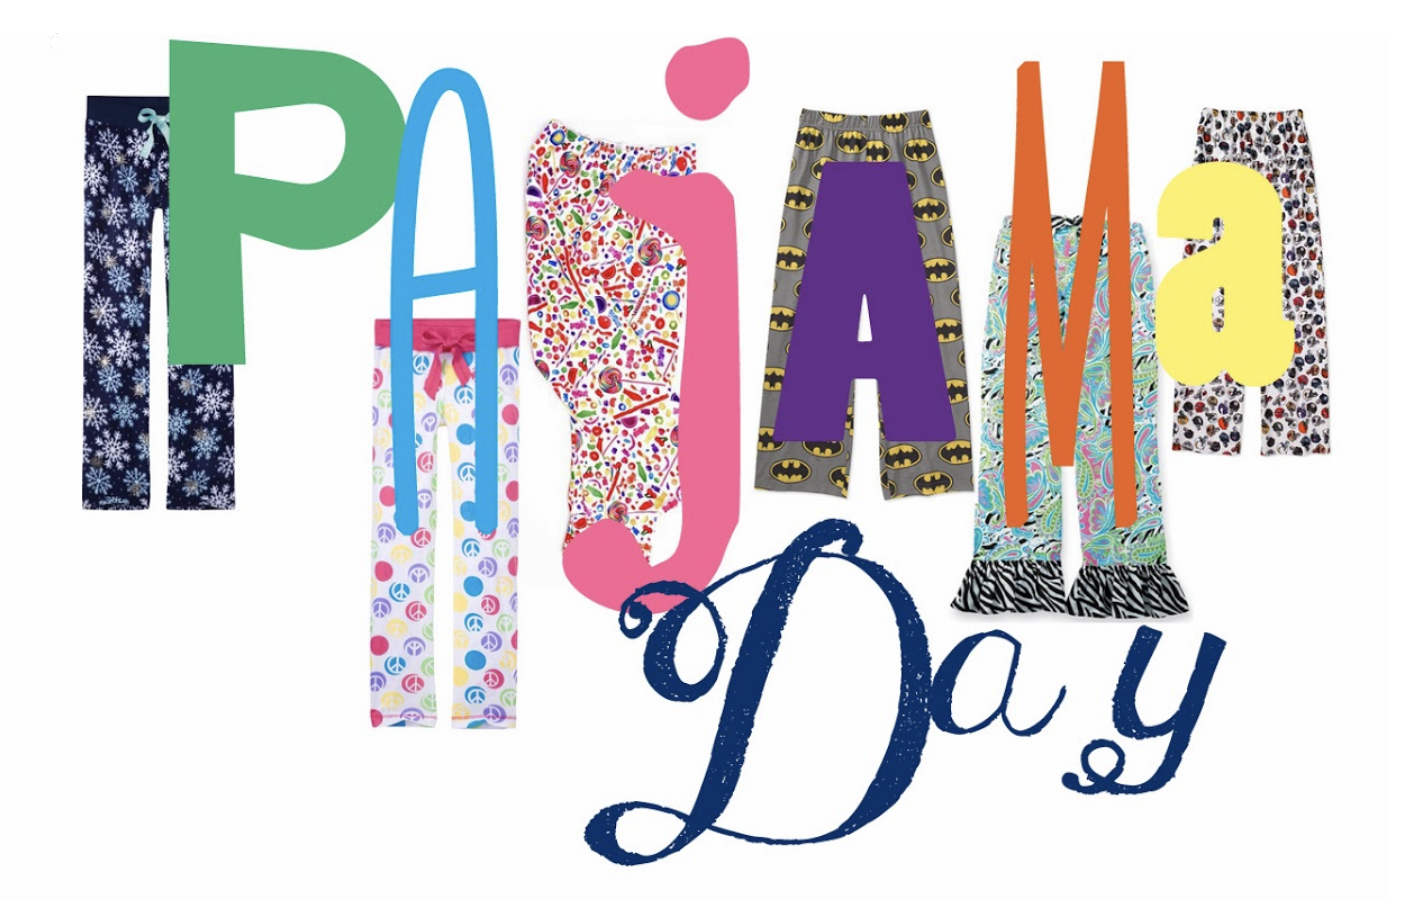 https://lynwood.nusd.org/wp-content/uploads/sites/7/2019/11/Pajama-Day.png